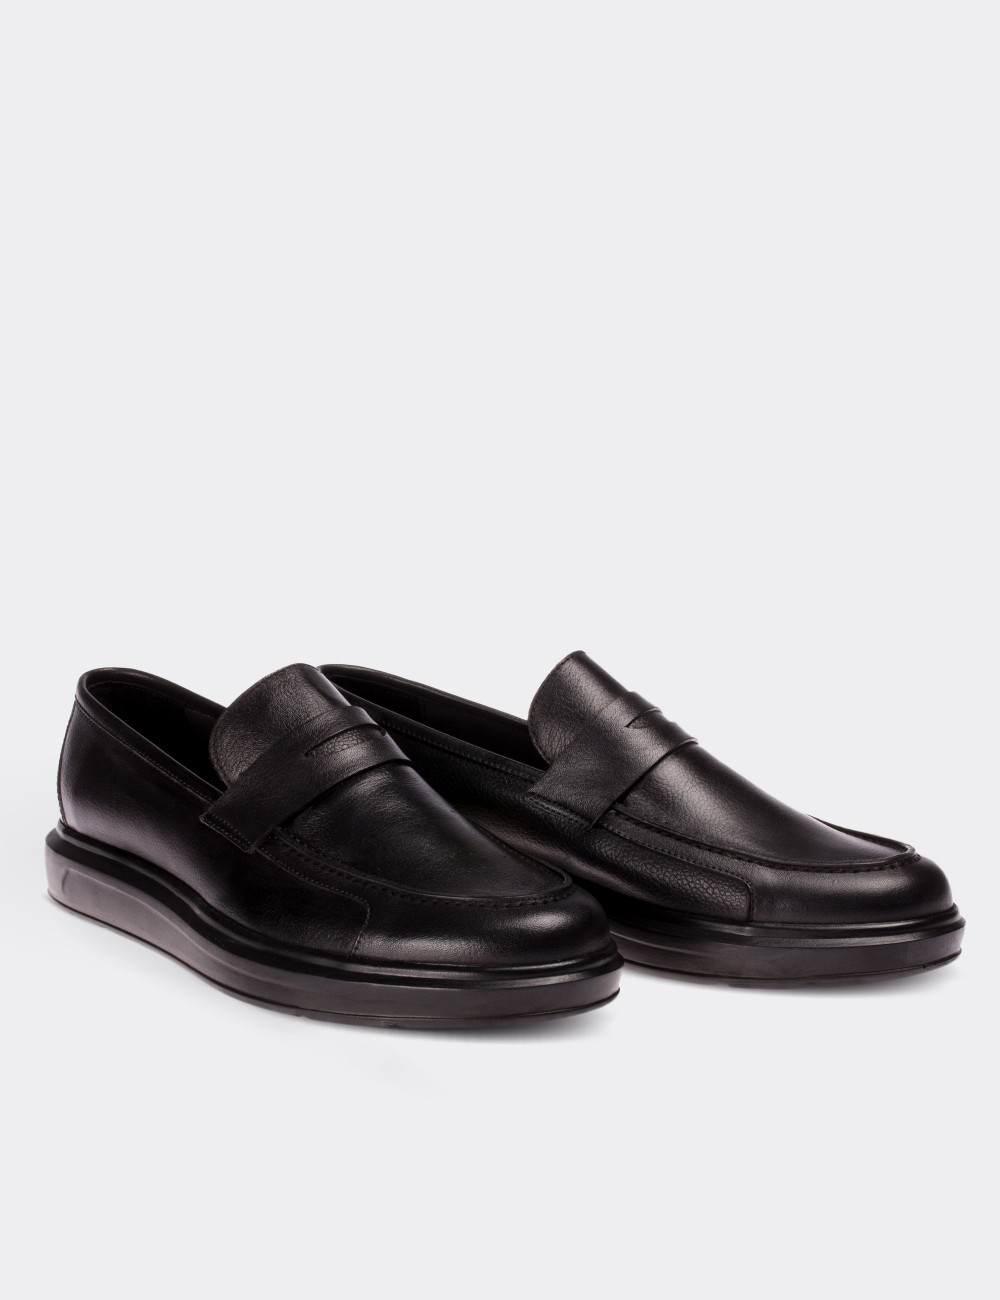 Black  Leather Loafers & Moccasins Shoes - 01564MSYHP05